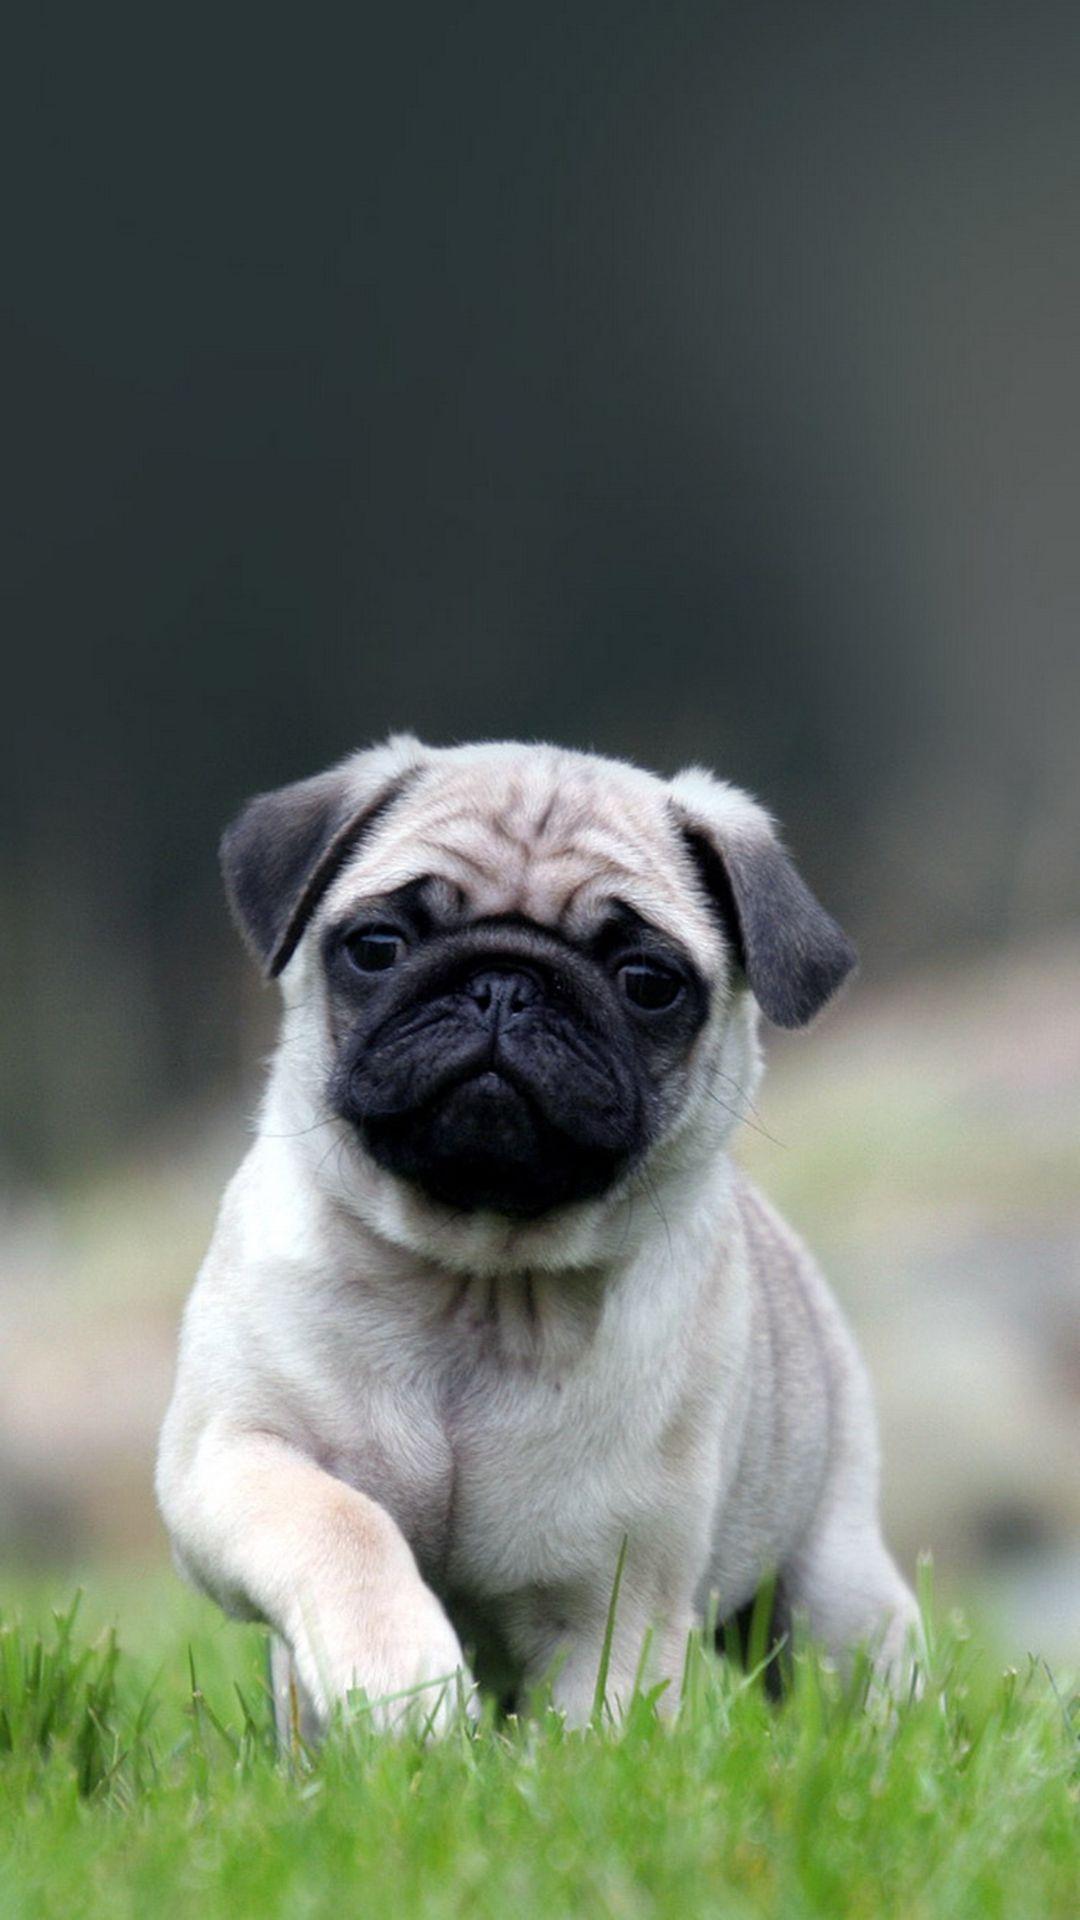 Cute Pug Dog In Grass iPhone 8 Wallpaper Download. iPhone